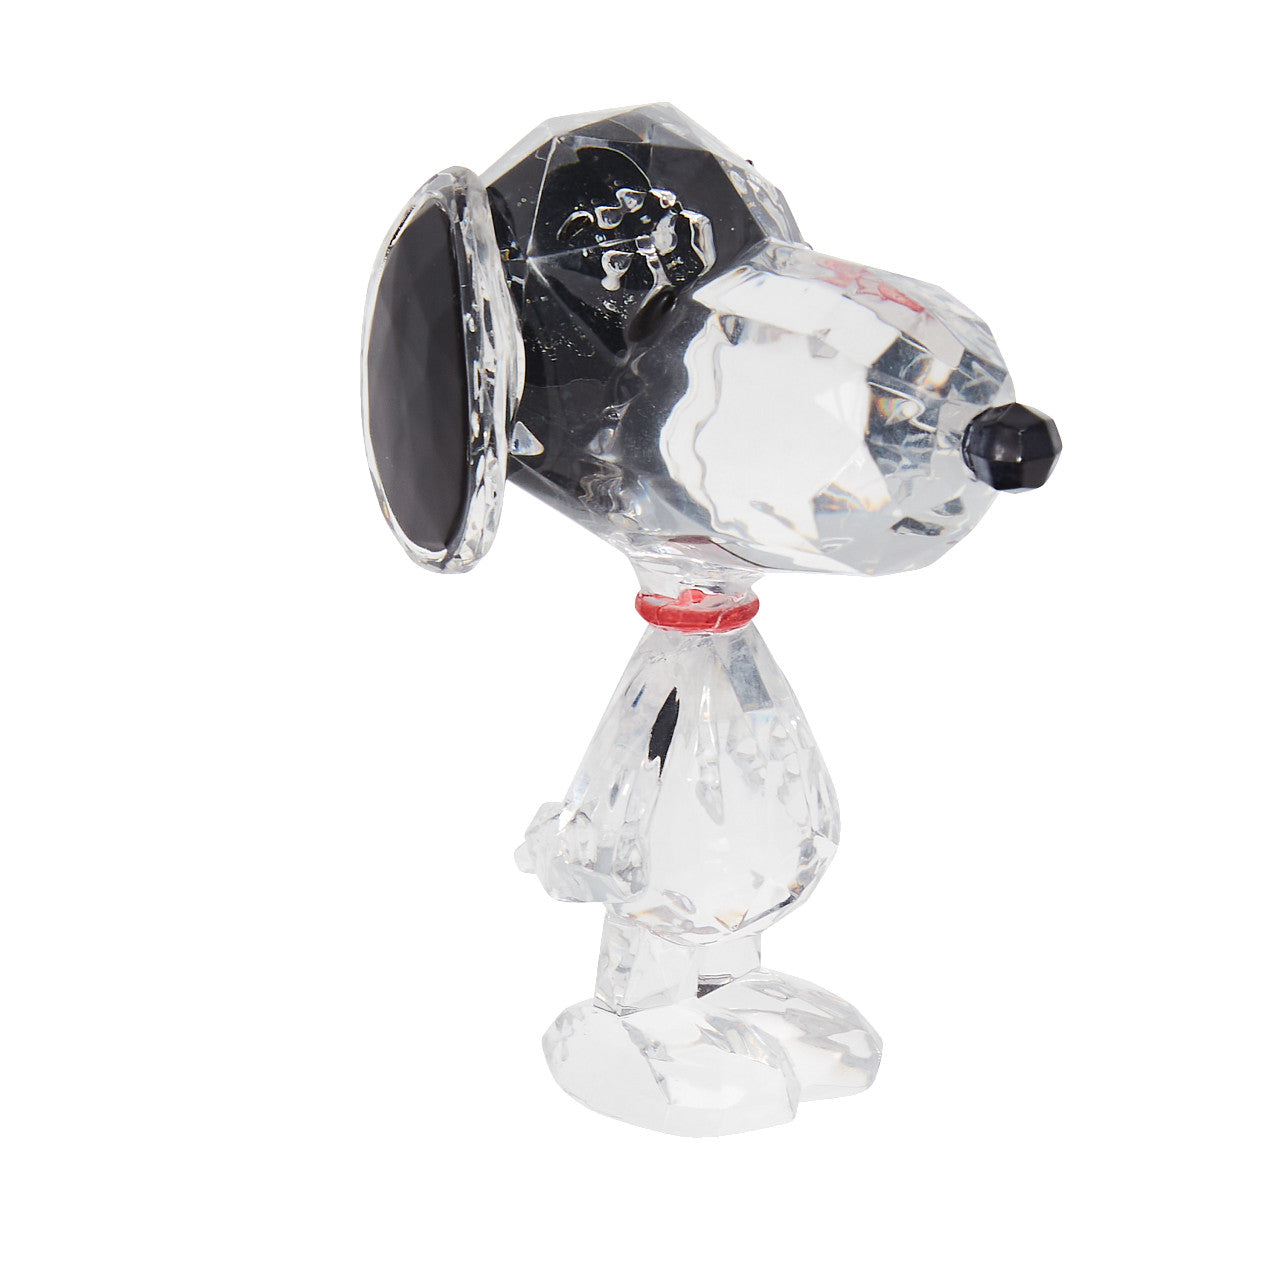 Snoopy Facets Figurine